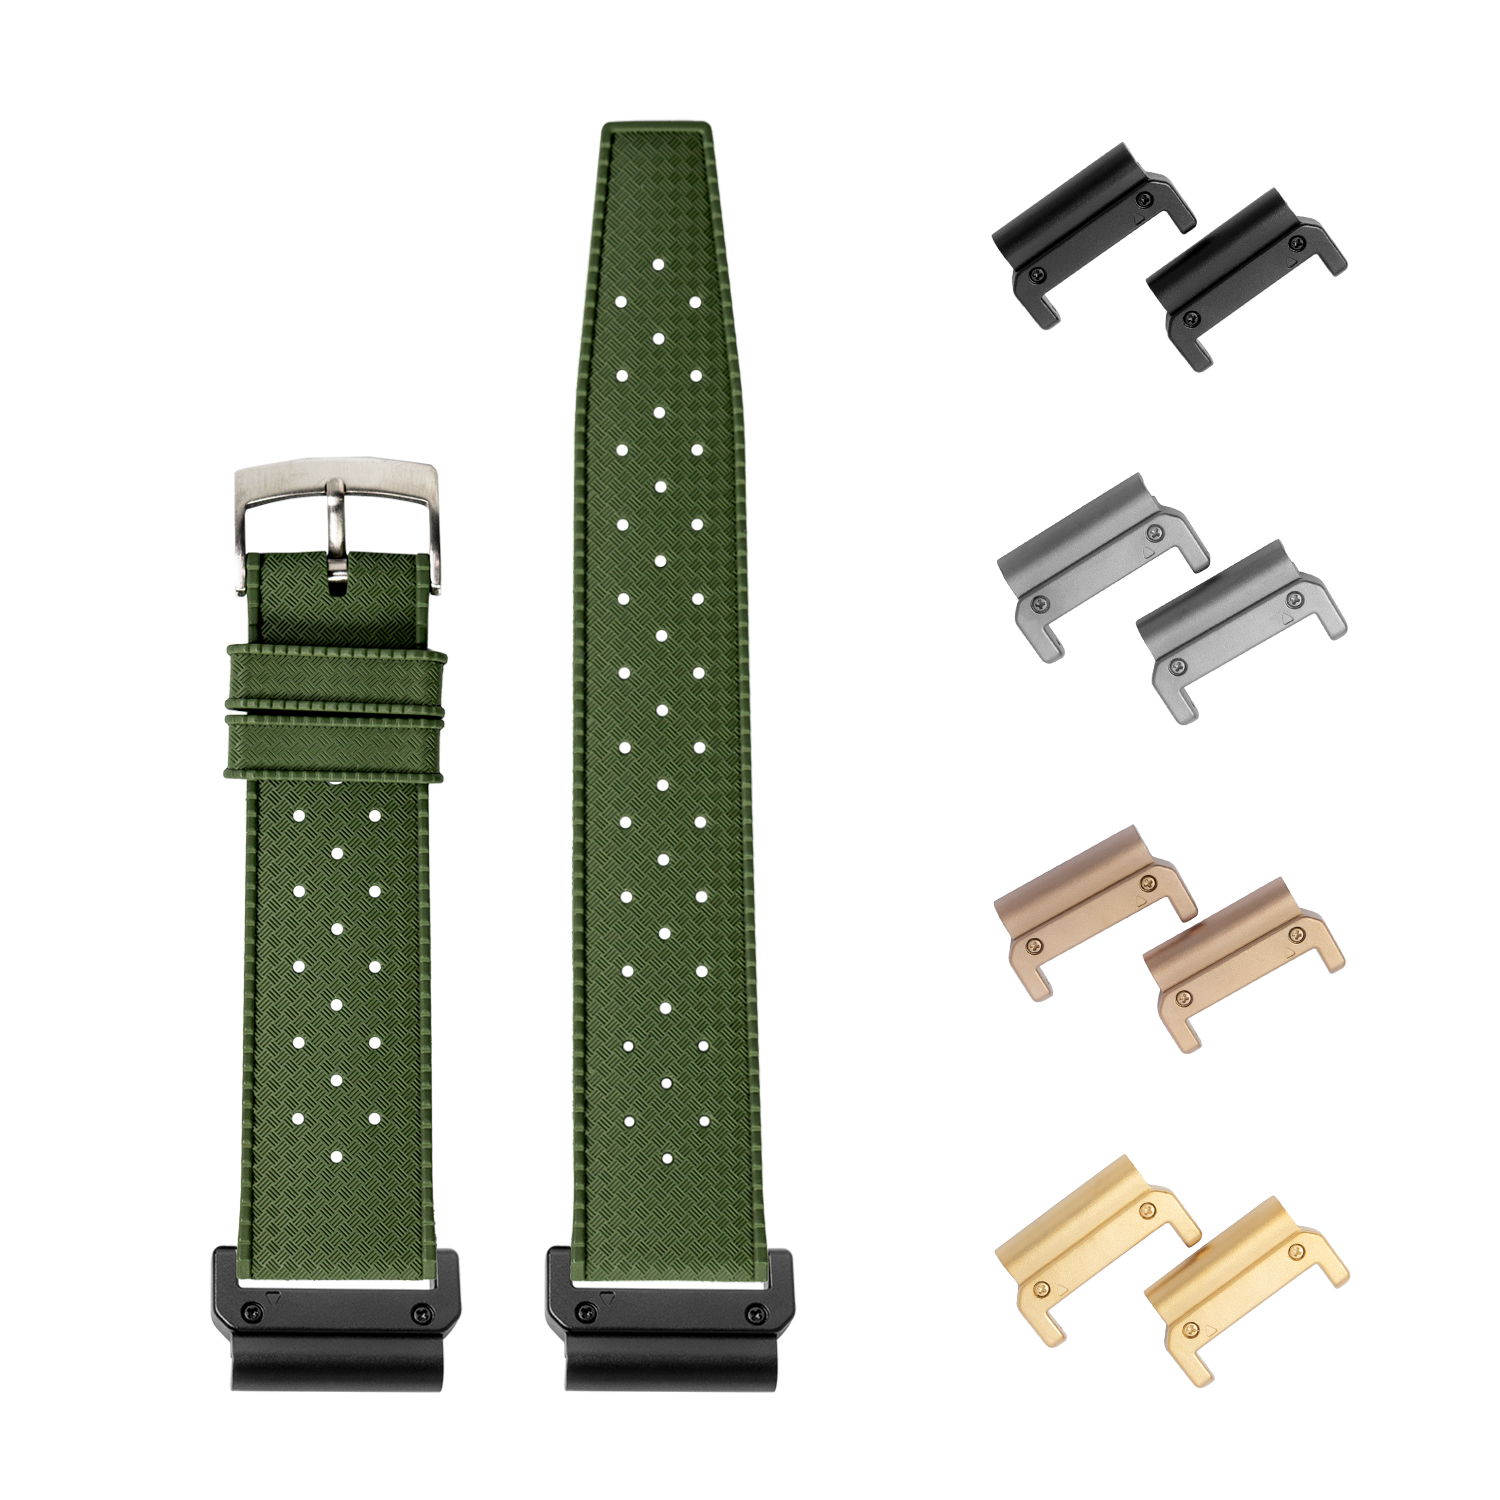 [QuickFit] King Tropic FKM Rubber - Forest Green 22mm